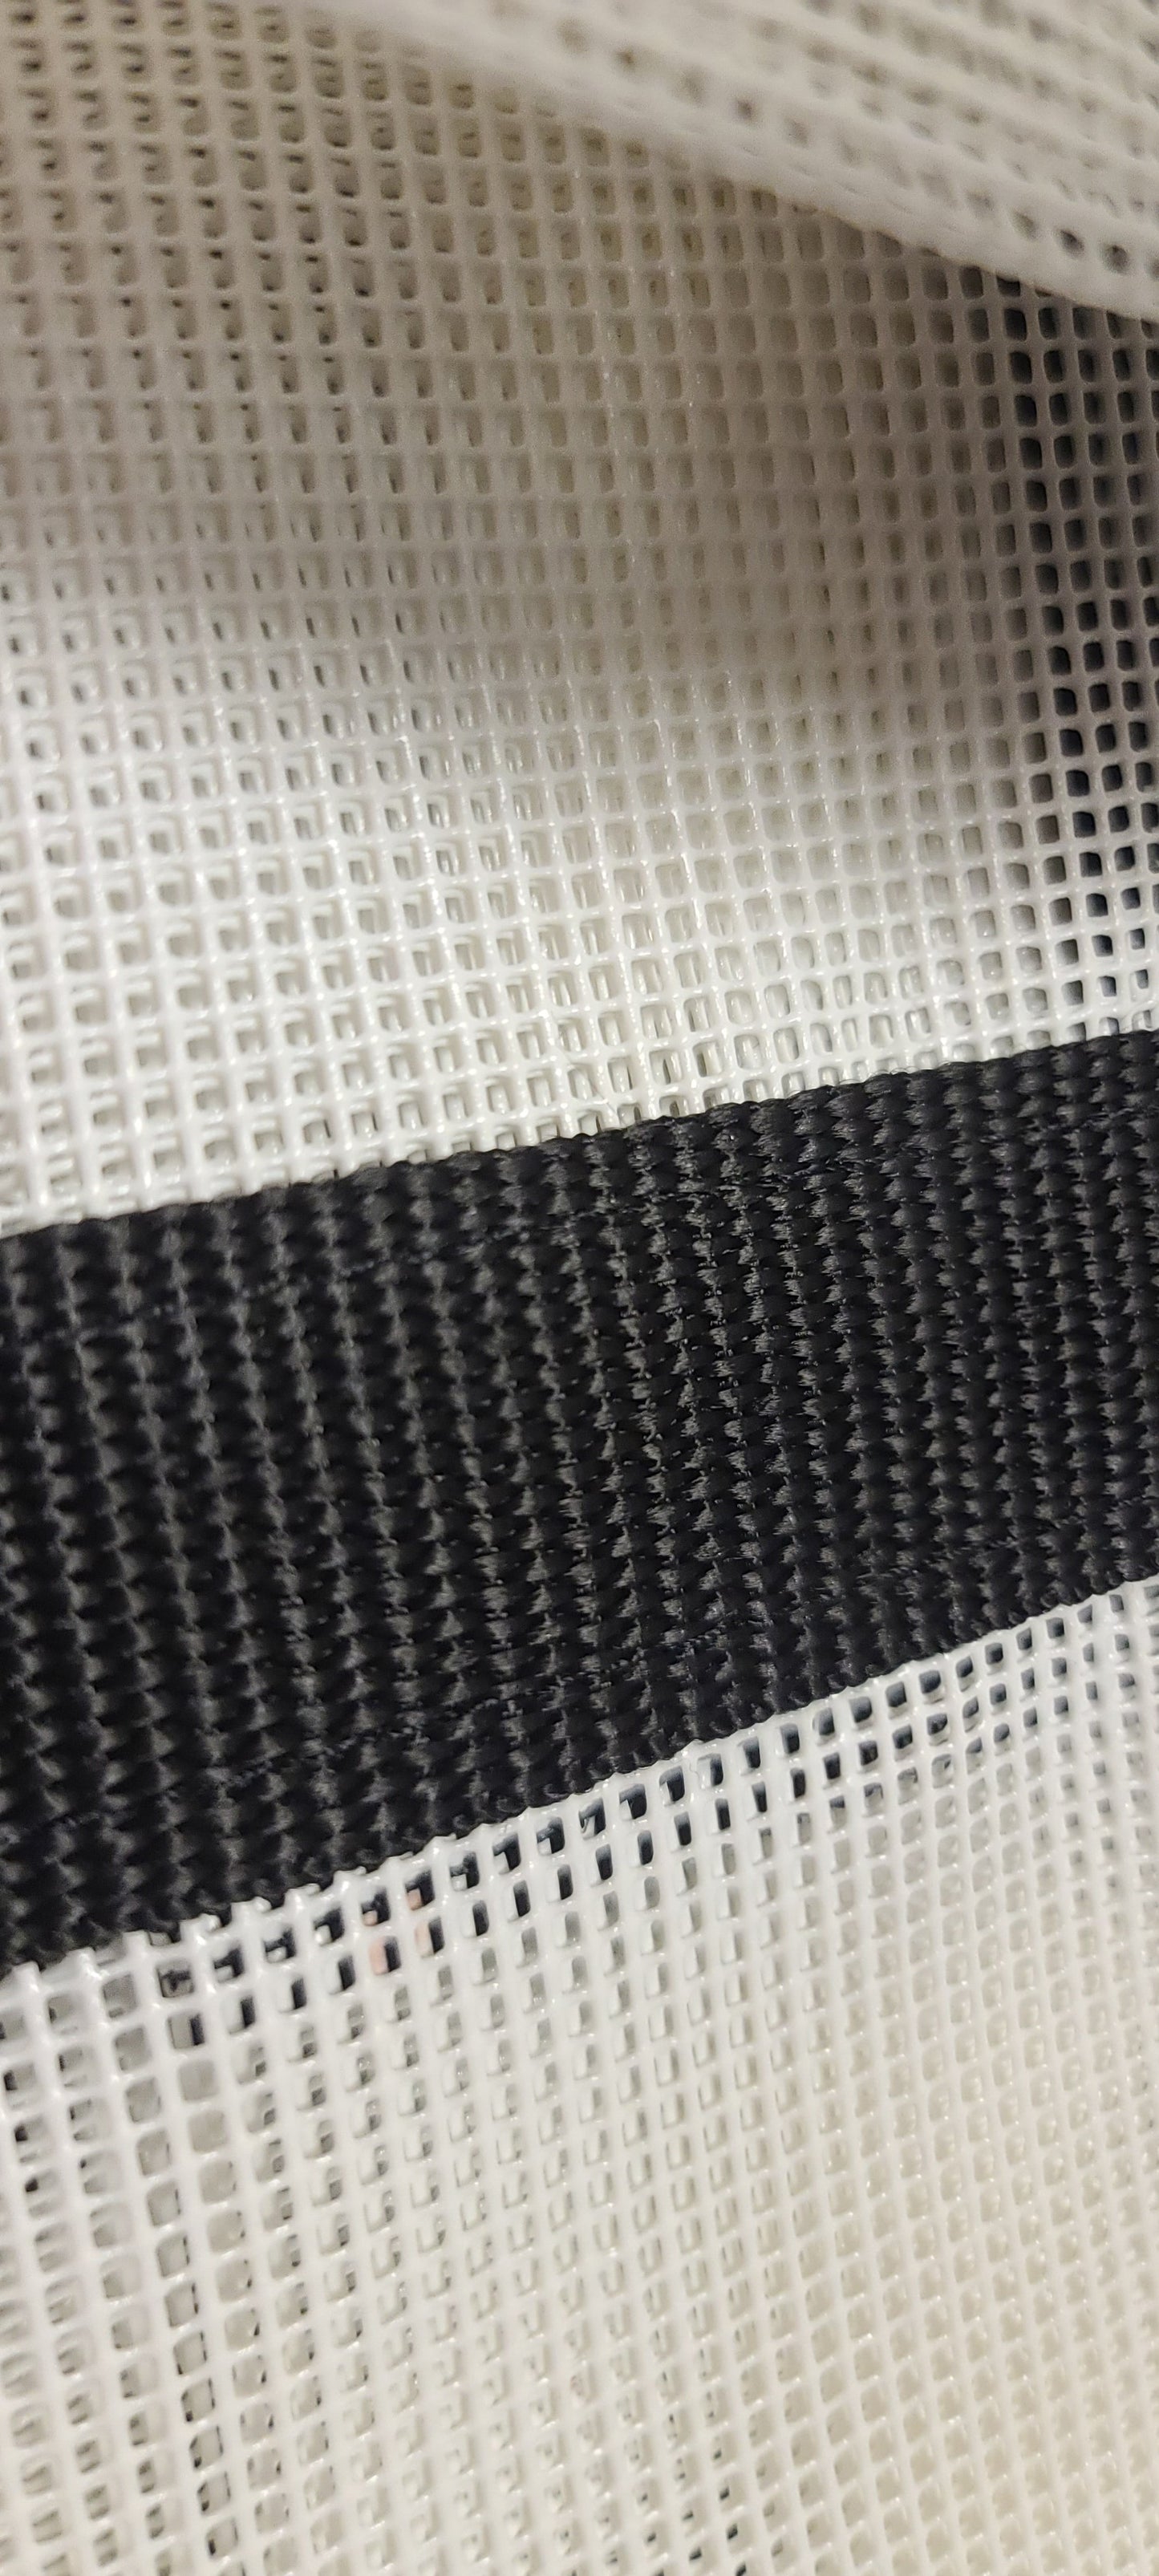 Yacht bunk accessory, close up of  white netting and blck trim